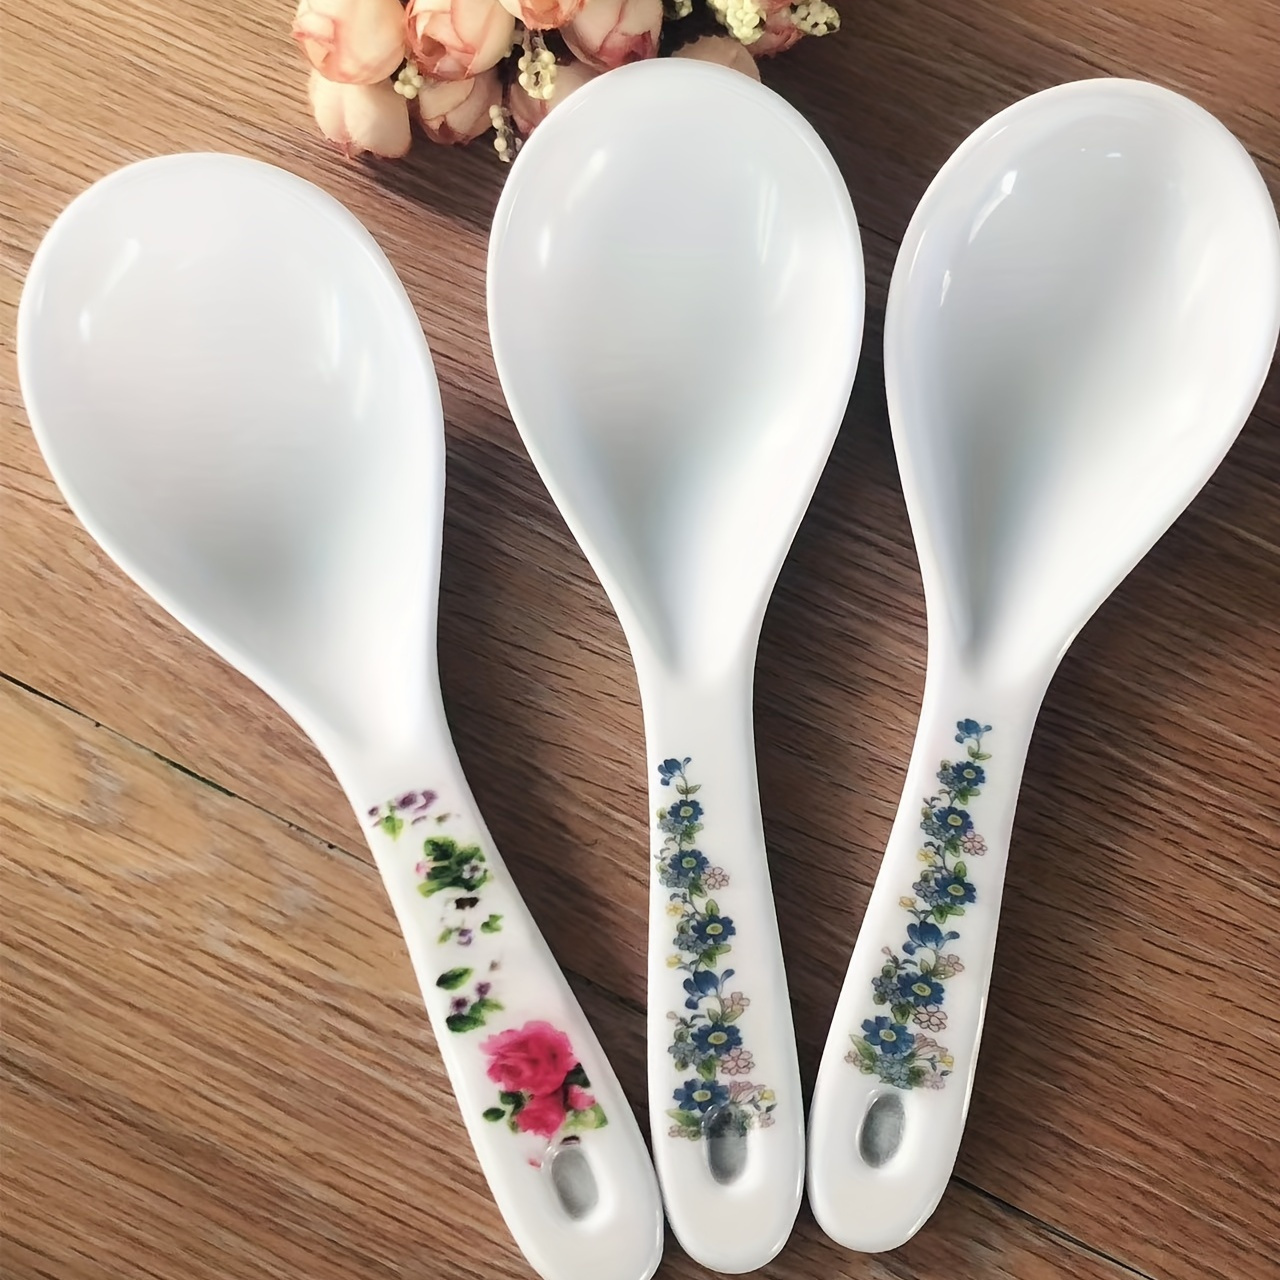 4pcs Baby Food Feeding Spoons Set, Including Small Spoon, Pot Shovel, Soup  Ladle, And Silicone Spoon